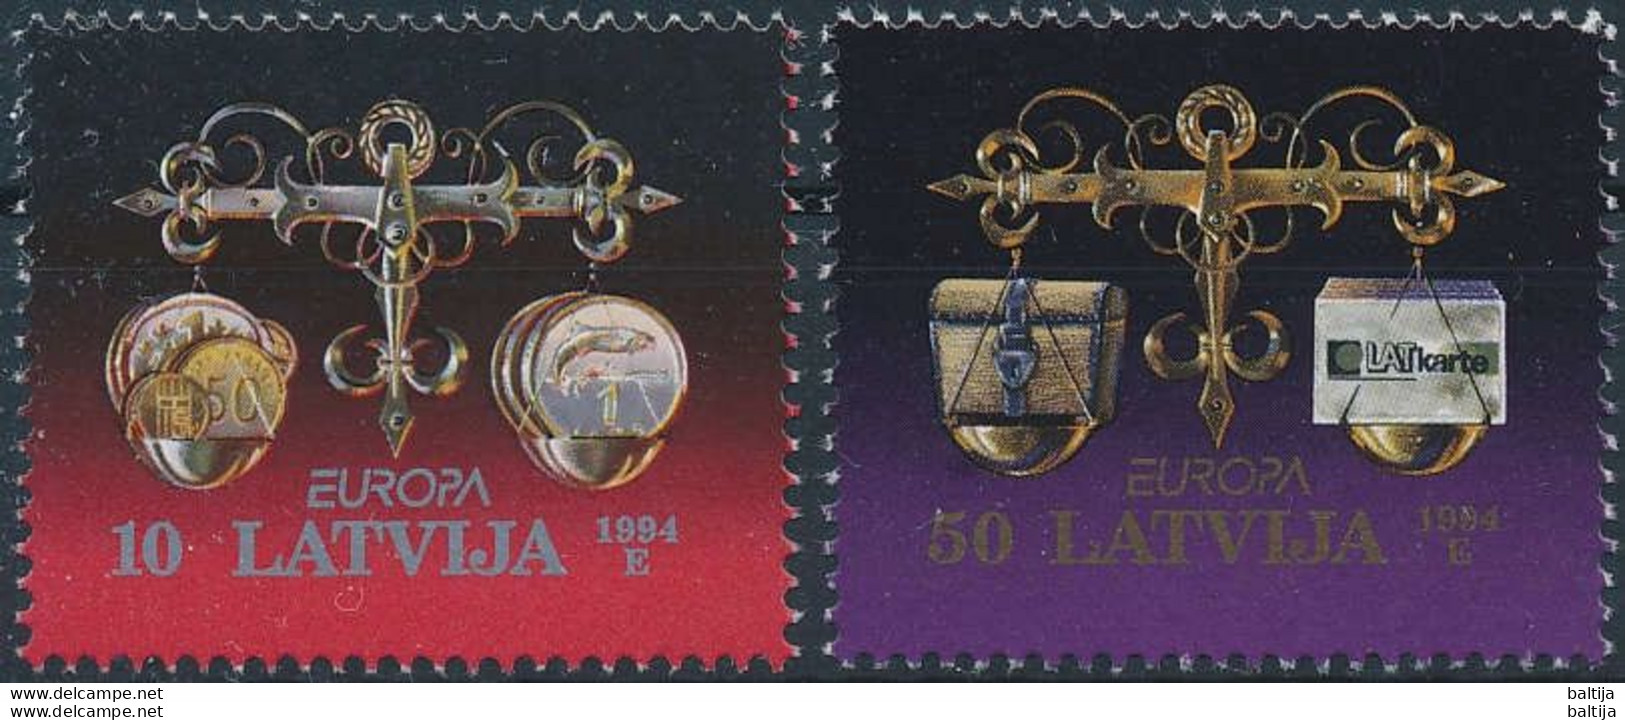 Mi 376-77 ** MNH / CEPT Europa, Discoveries And Innovations, Money, Coins - Lettland